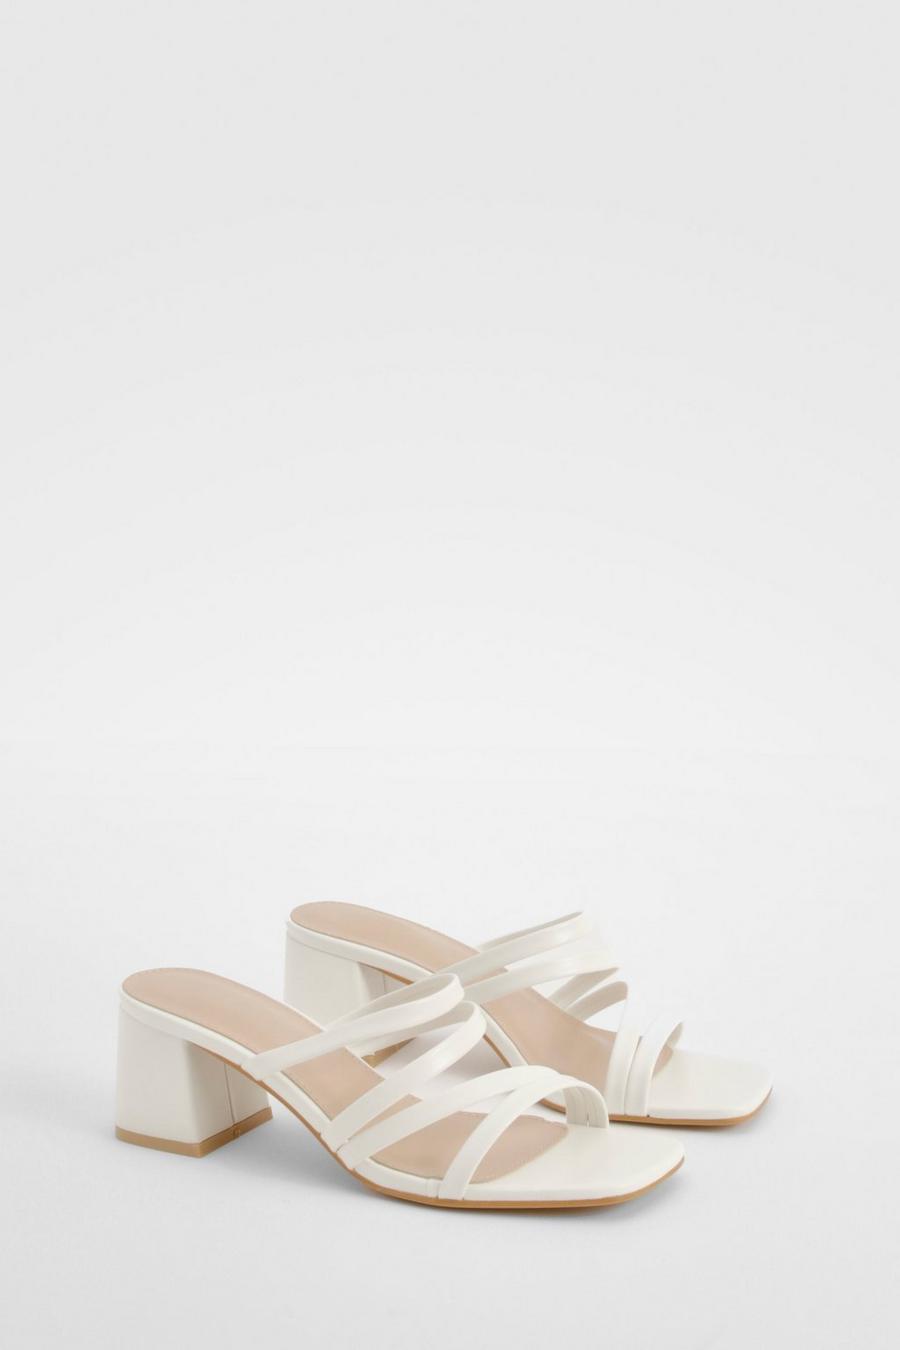 White Strappy Block Heeled Mules   